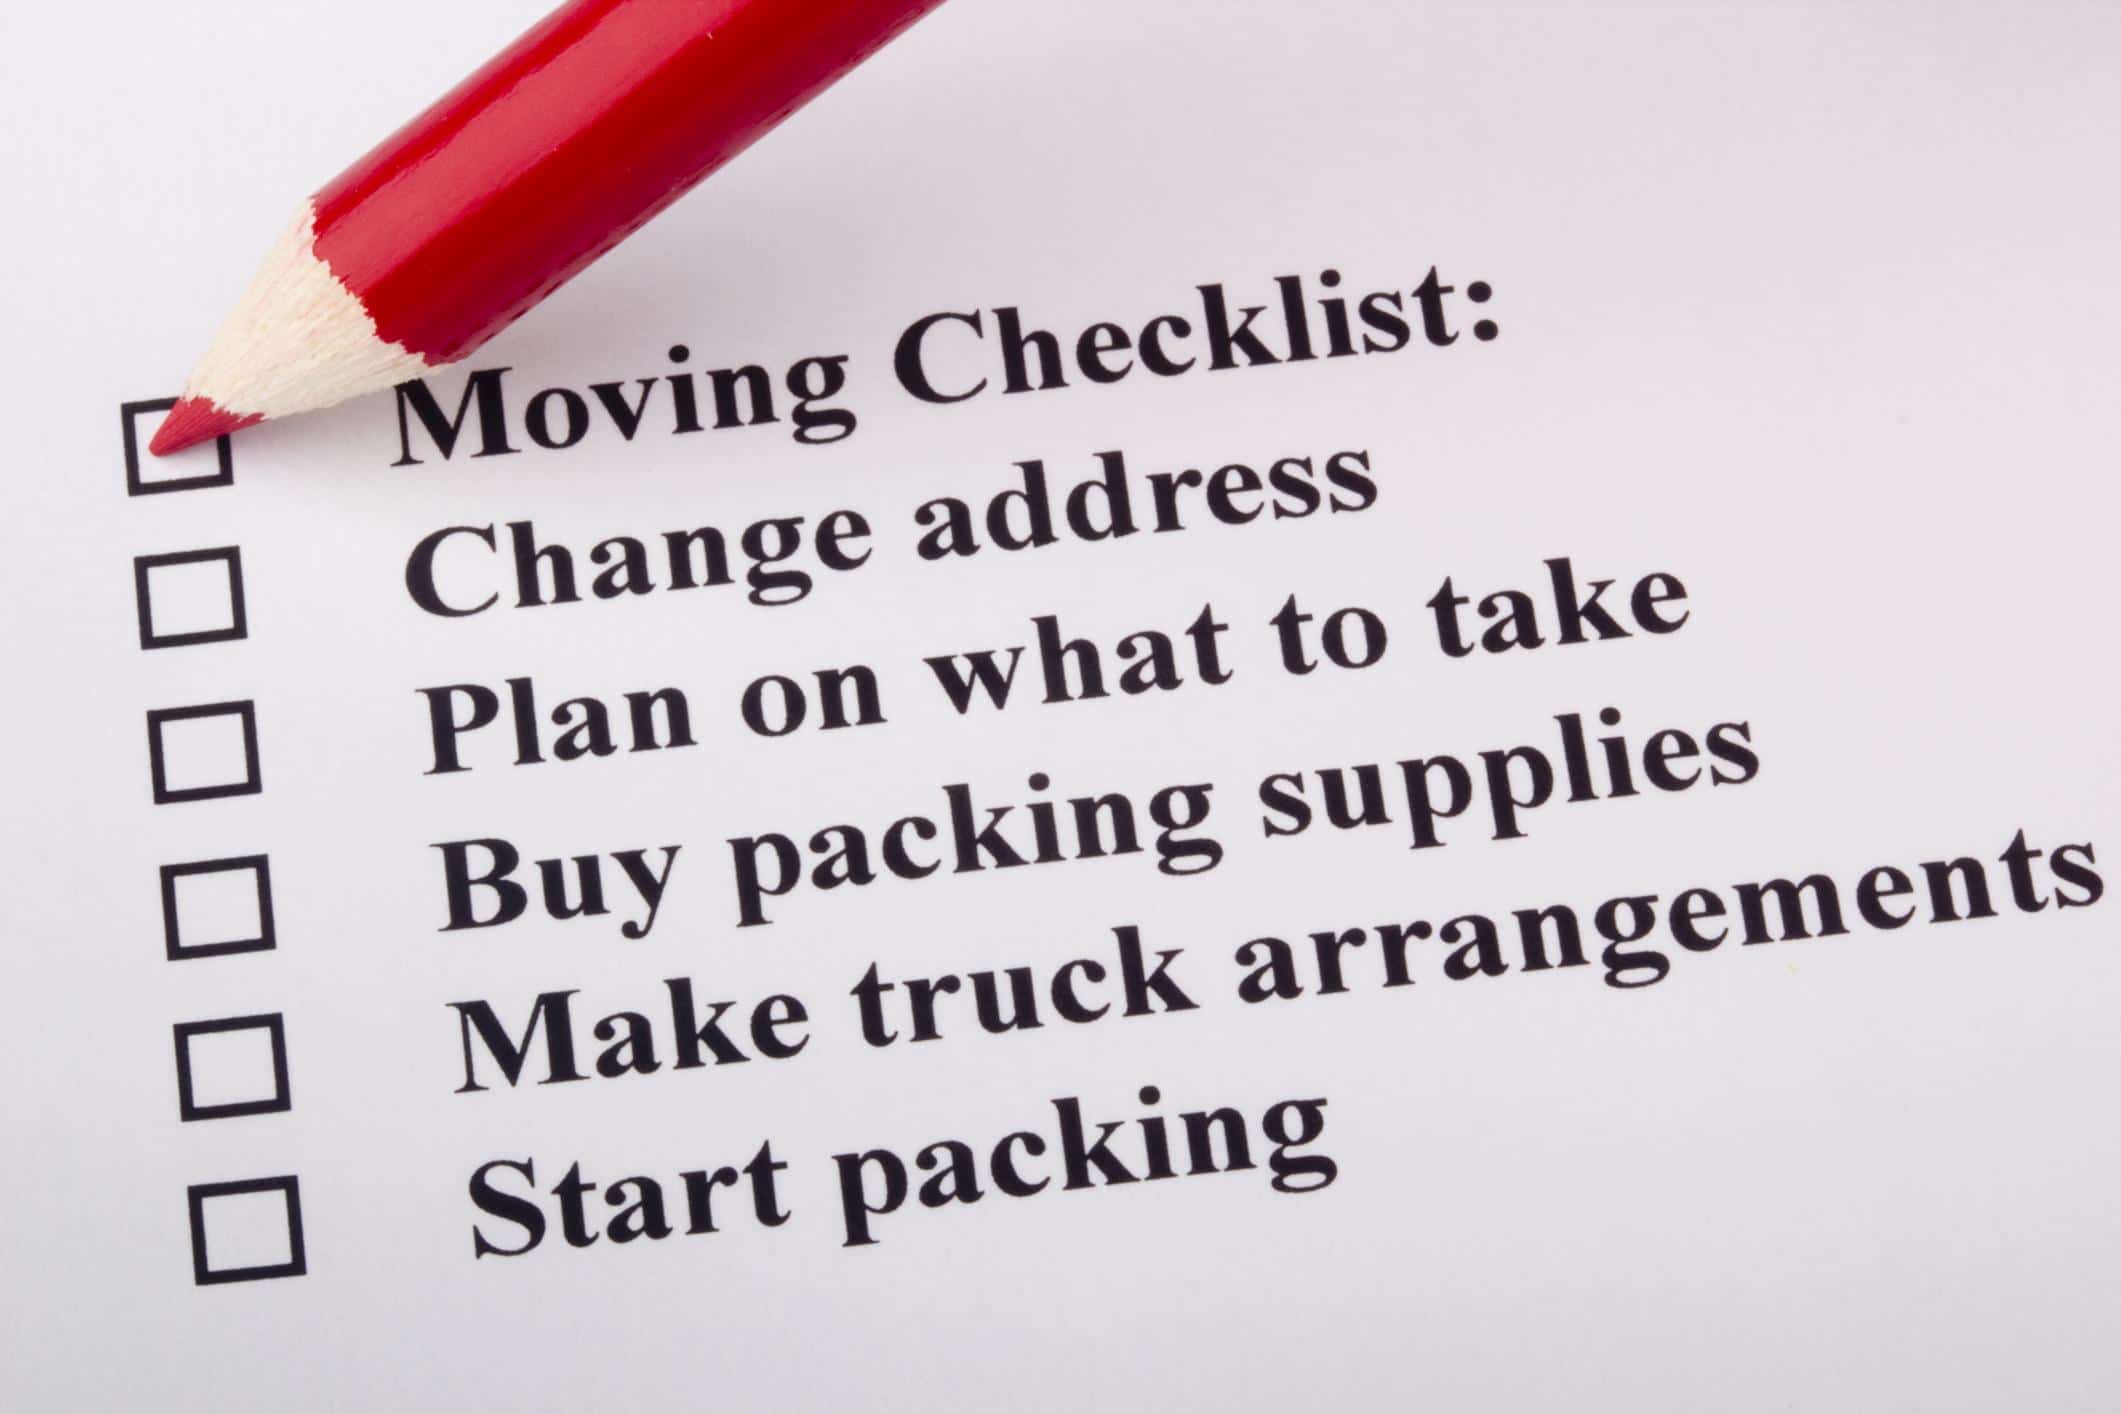 checklist for moving out of state